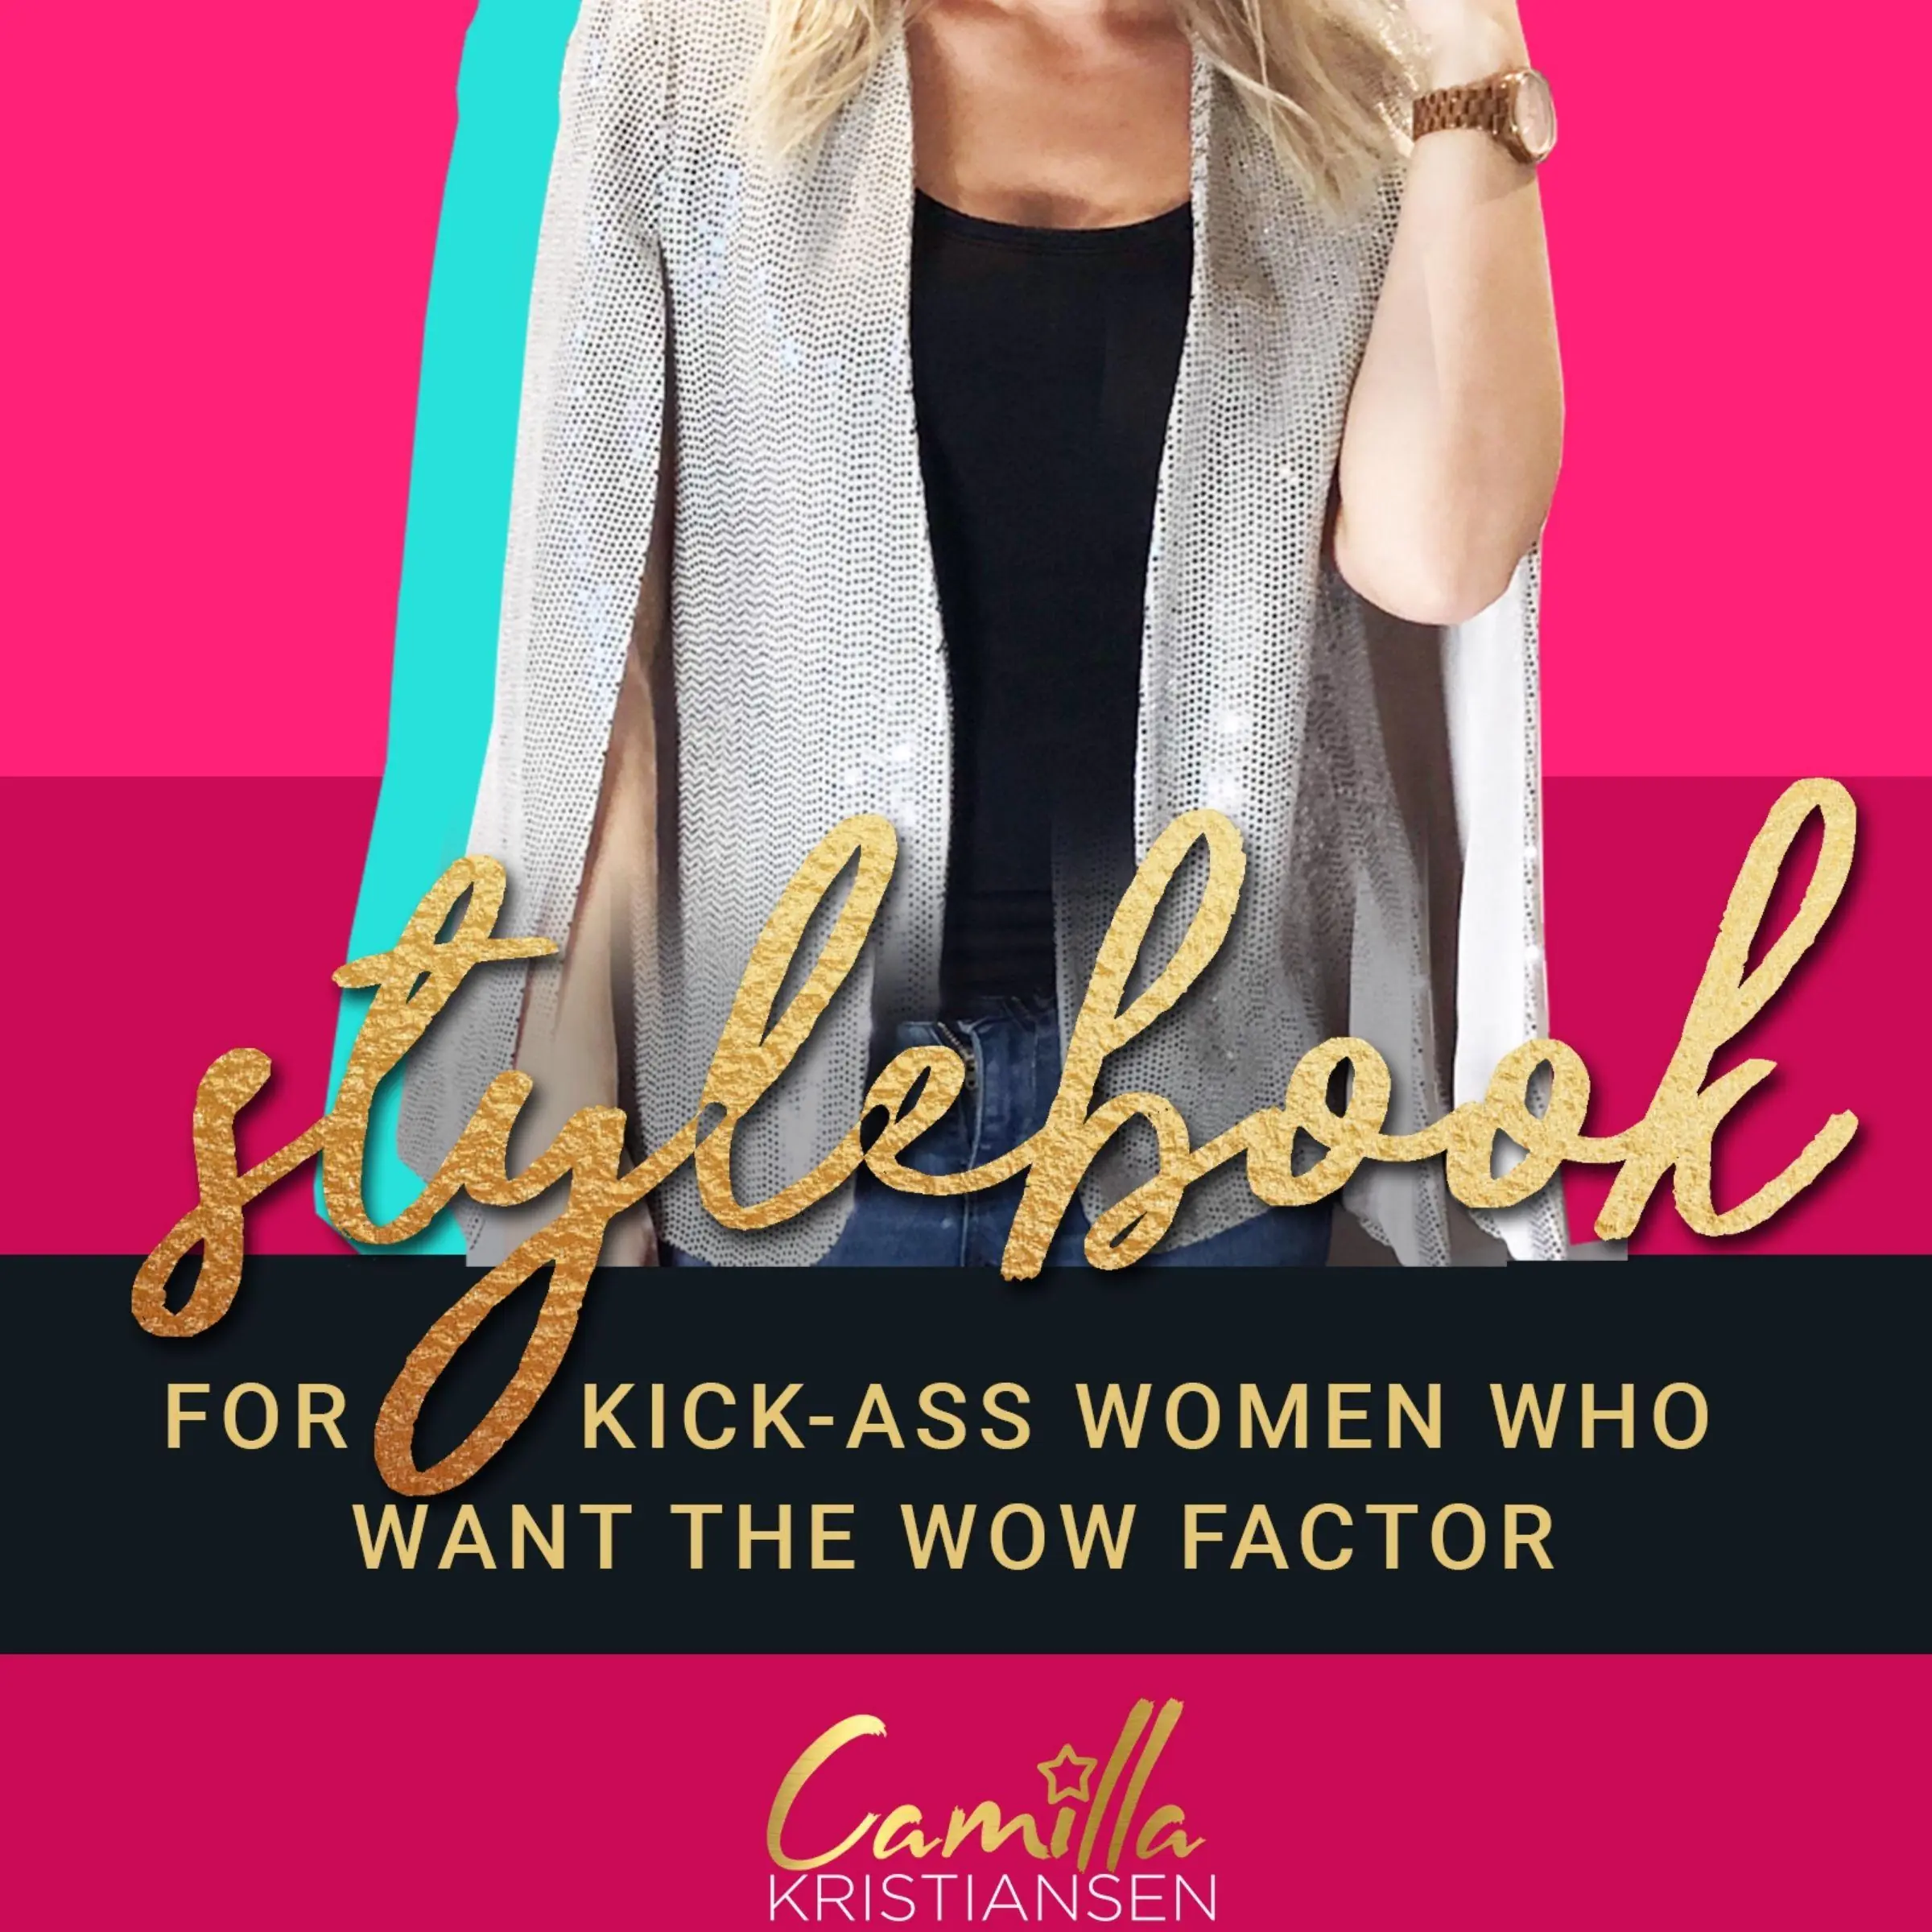 Stylebook: For kick-ass women who want the wow factor by Camilla Kristiansen Audiobook